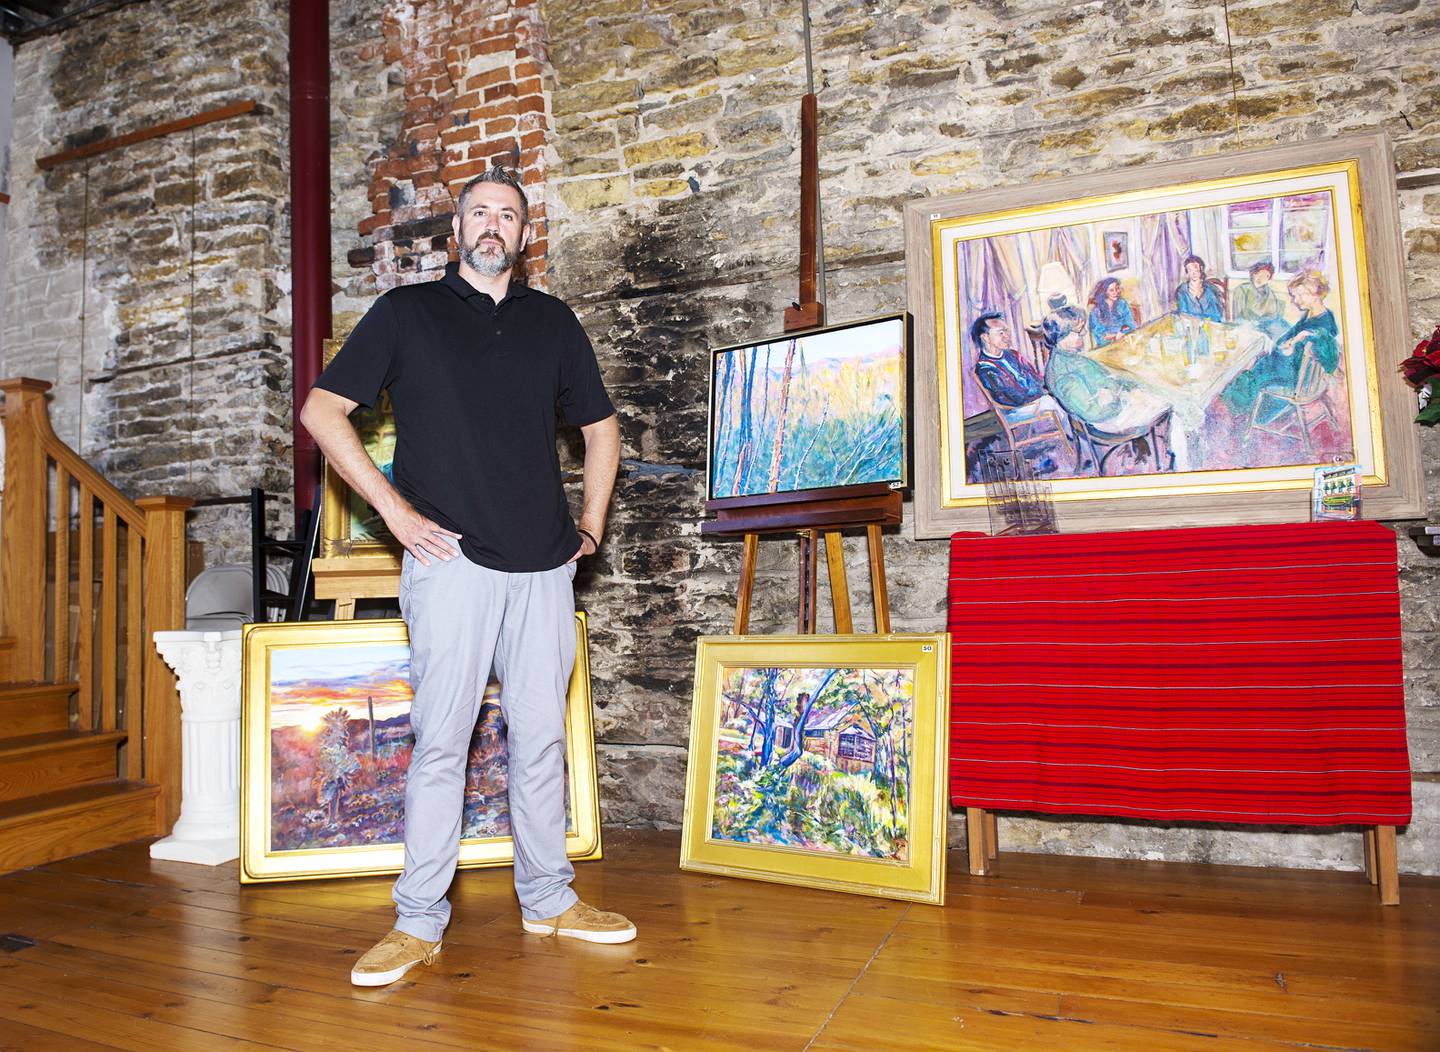 The Next Picture Show's new executive director, Philip Atilano, has a vision  for the future of the nonprofit gallery that includes more classes, more types of exhibits, and more space to show artists' works.